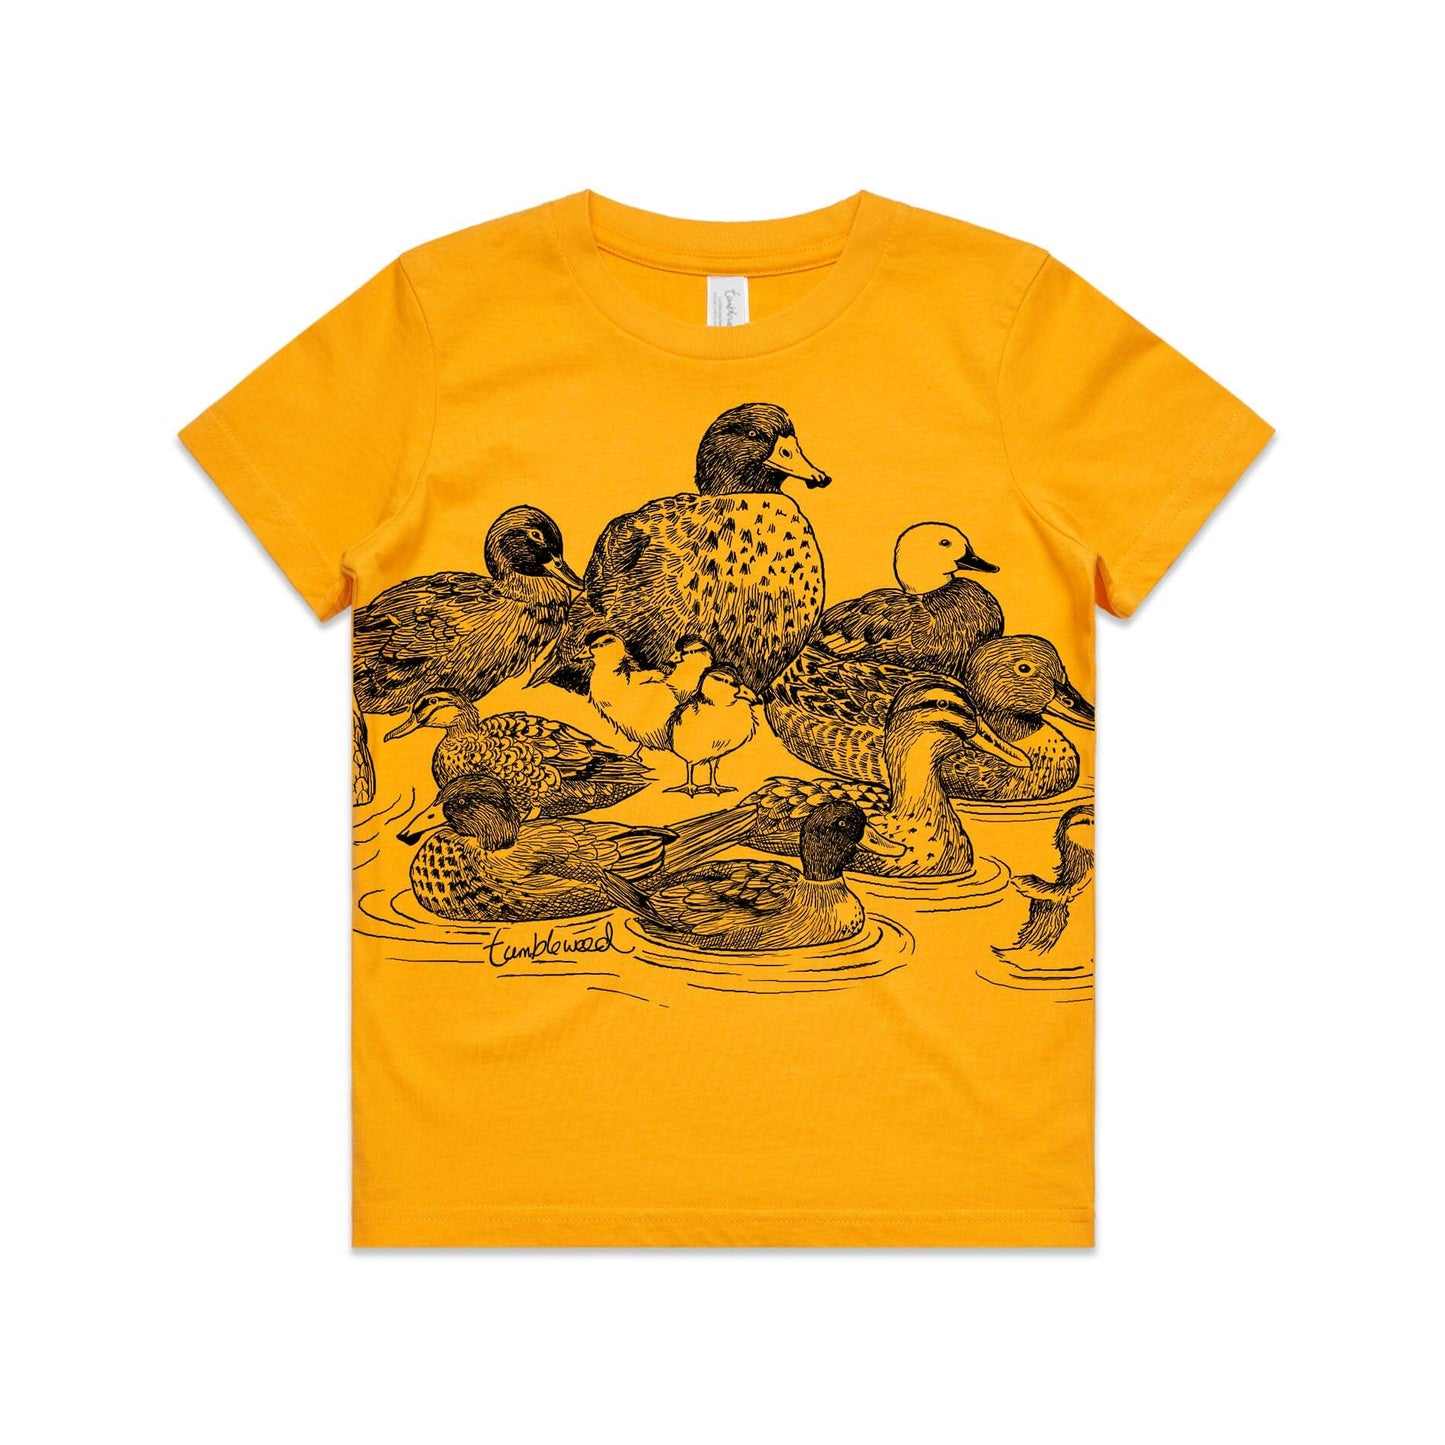 Gold, cotton kids' t-shirt with screen printed ducks design.